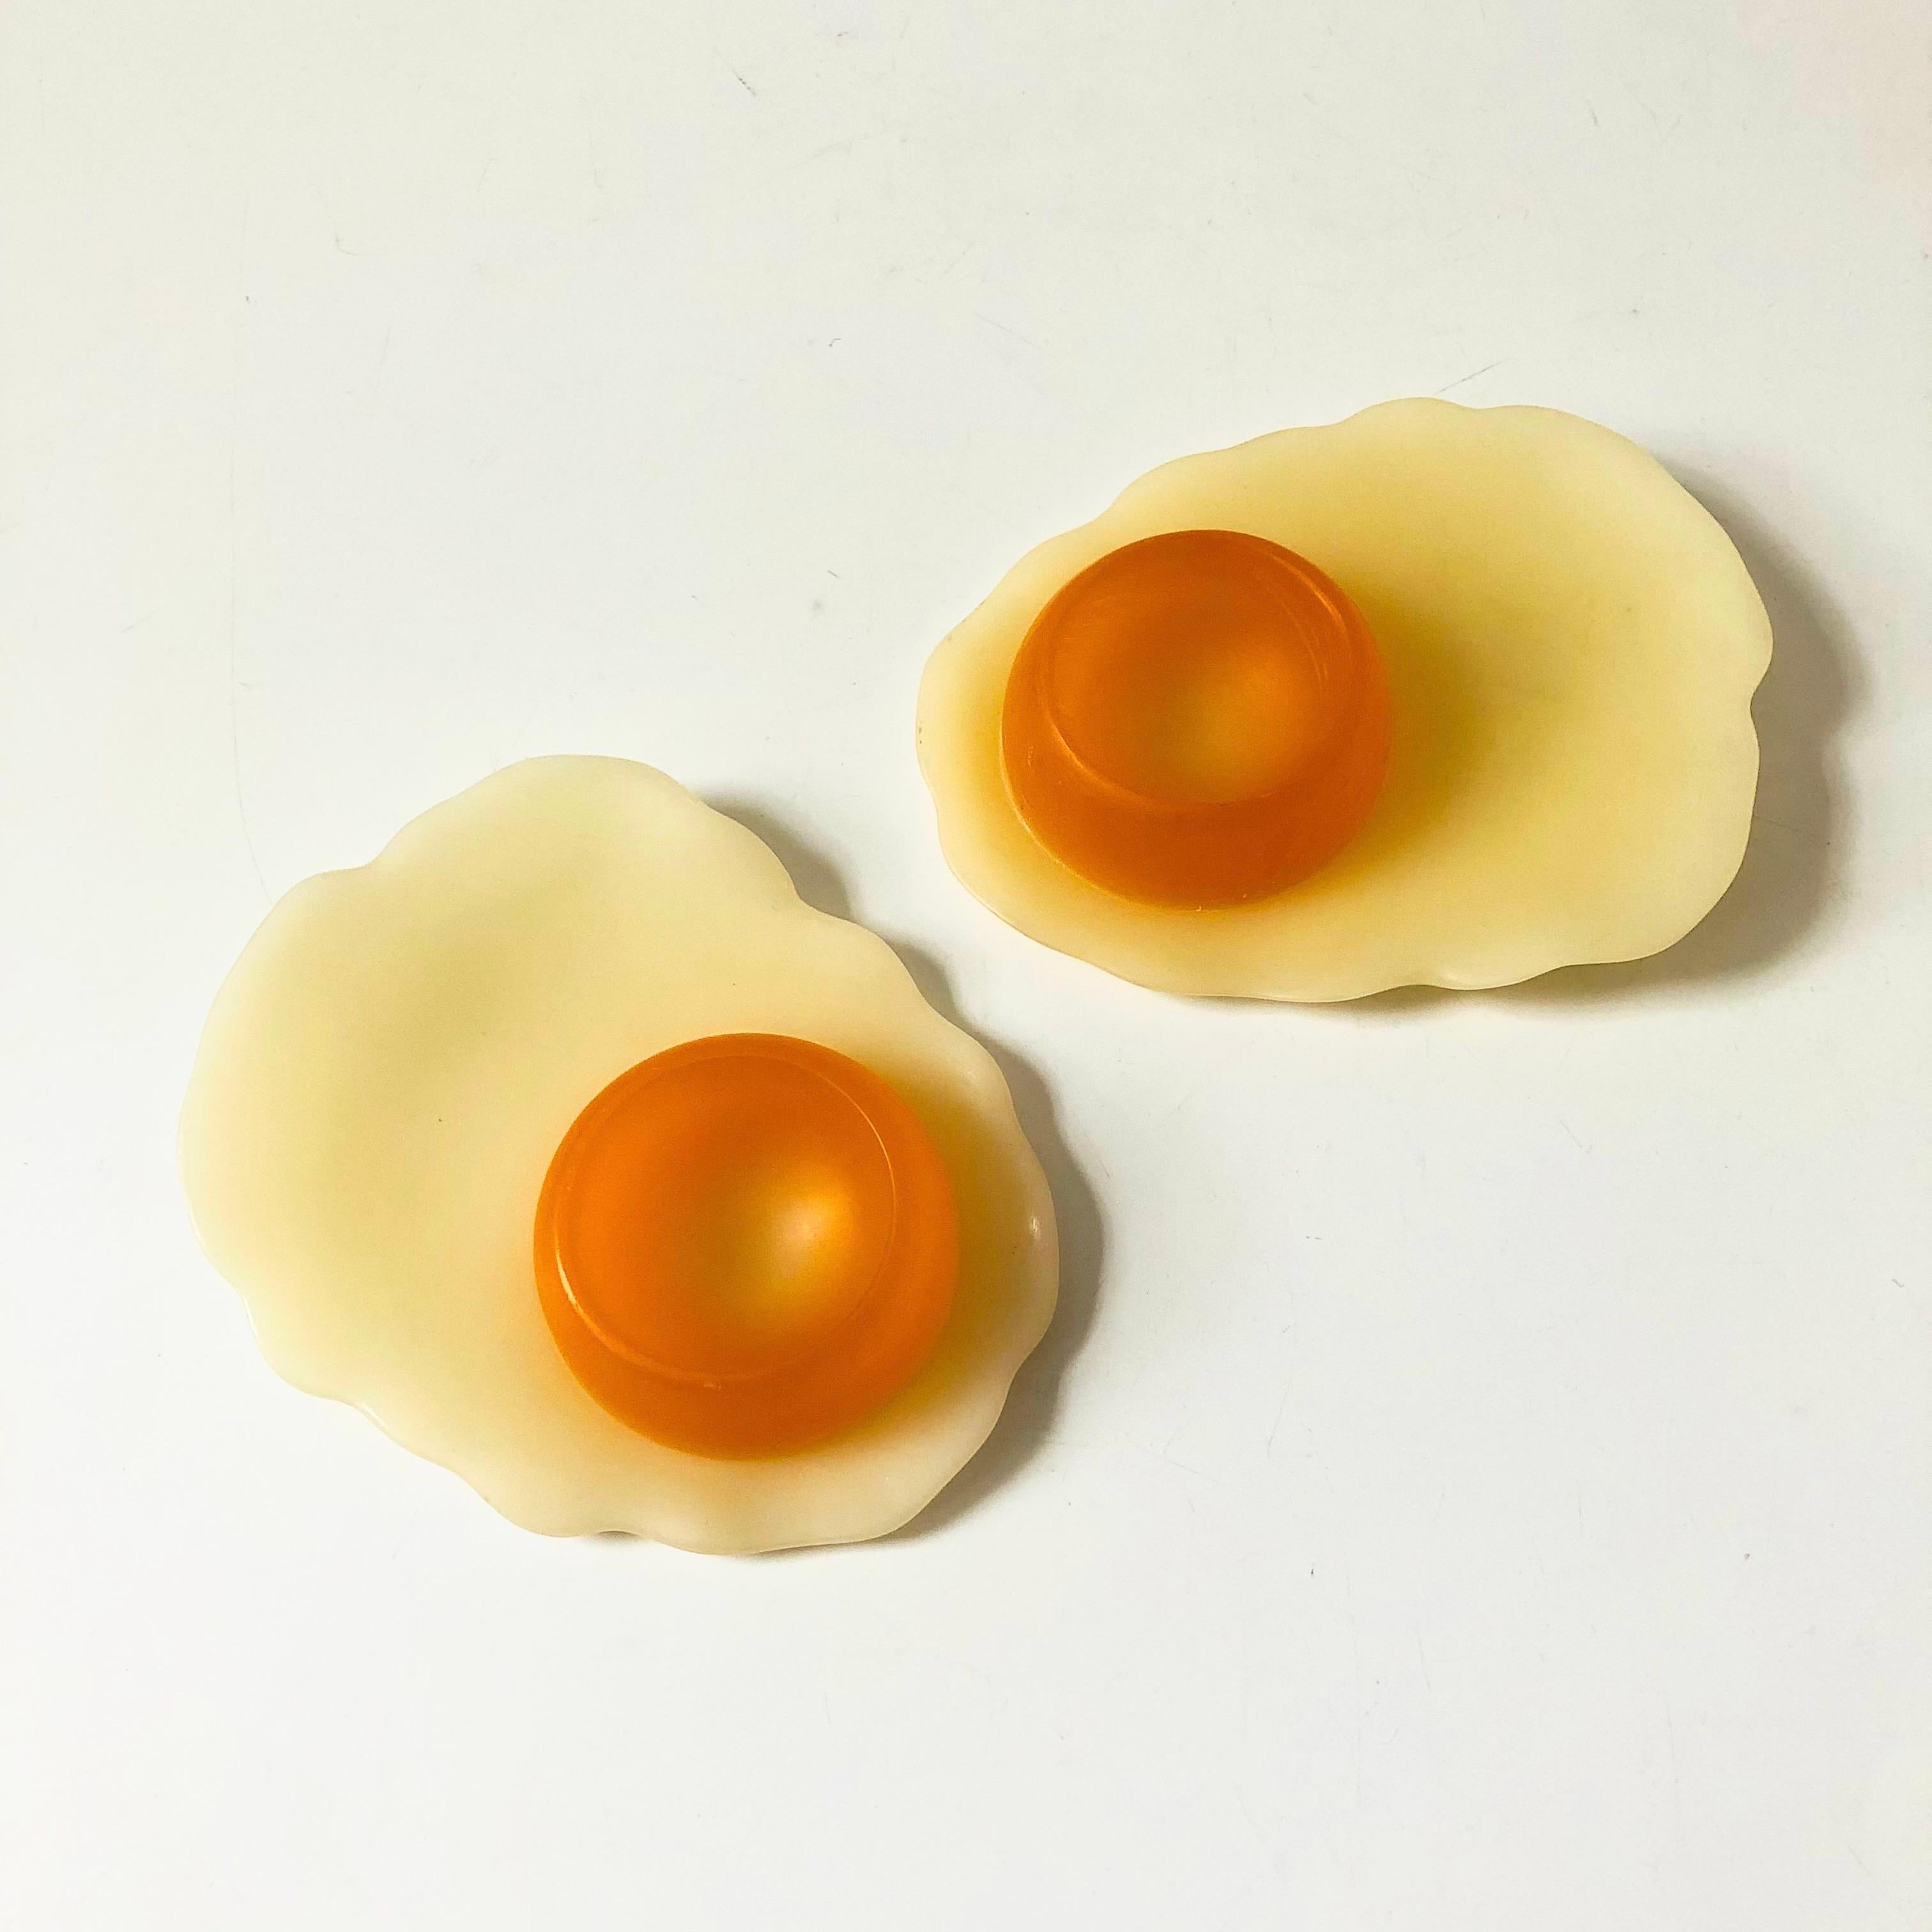 A wonderful pair of vintage novelty egg cups. Made of resin in the shape of fried eggs. An egg can be placed in the orange yolk. These could also be used as candle holders for small votives. Each is marked by the maker, made by Casablanca.

